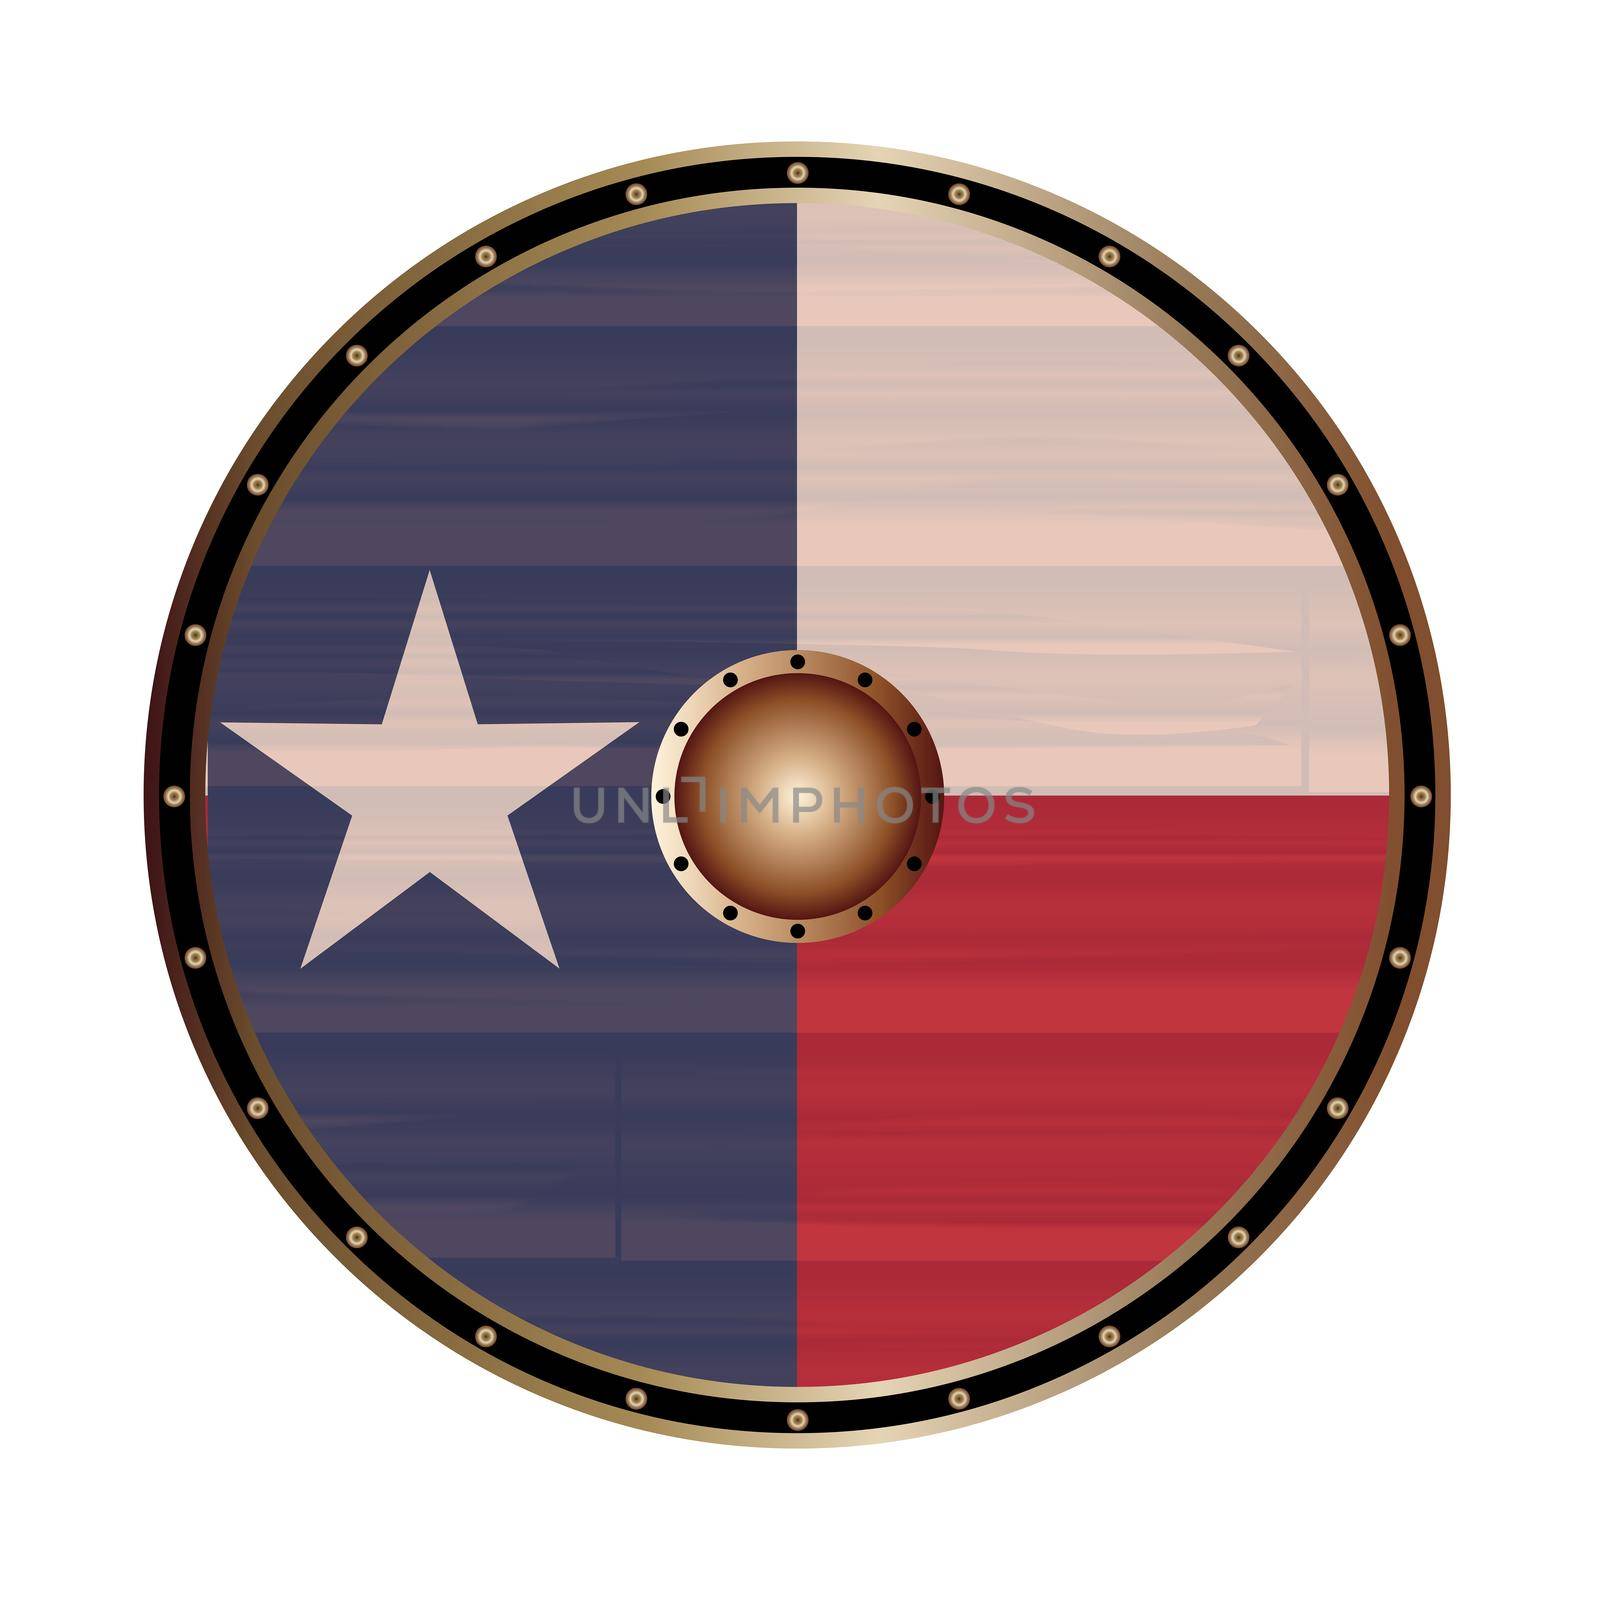 A round shield a depiction of the USA state of Texas flag on a white background